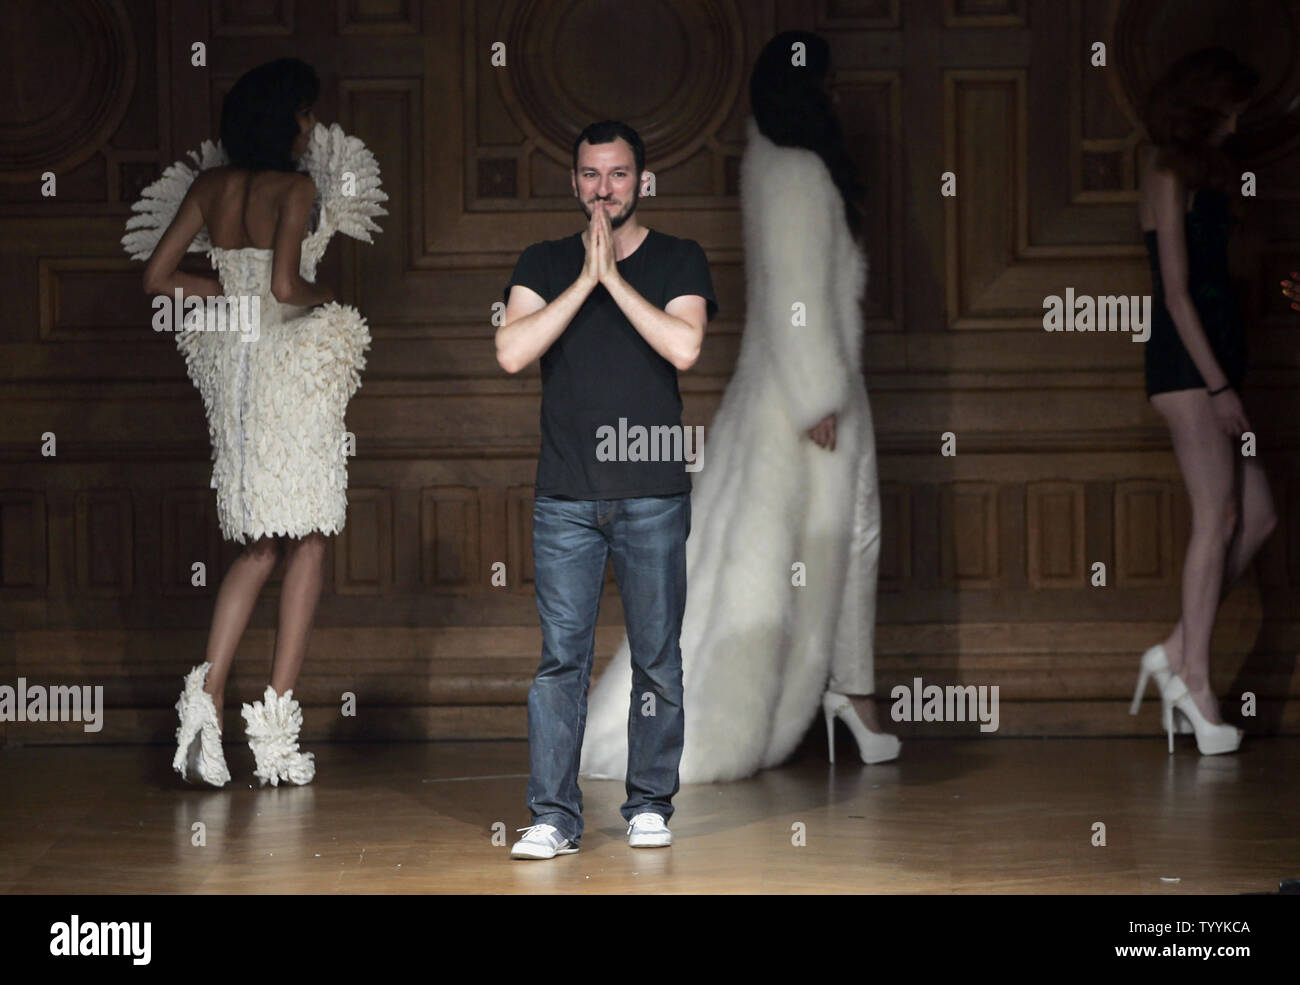 Turkish-born Belgian  fashion designer Serkan Cura salutes the audience at the end of the presentation of his Fall-Winter 2014-2015 High Fashion collection in Paris, France on July 10, 2014   UPI/Maya Vidon-White Stock Photo